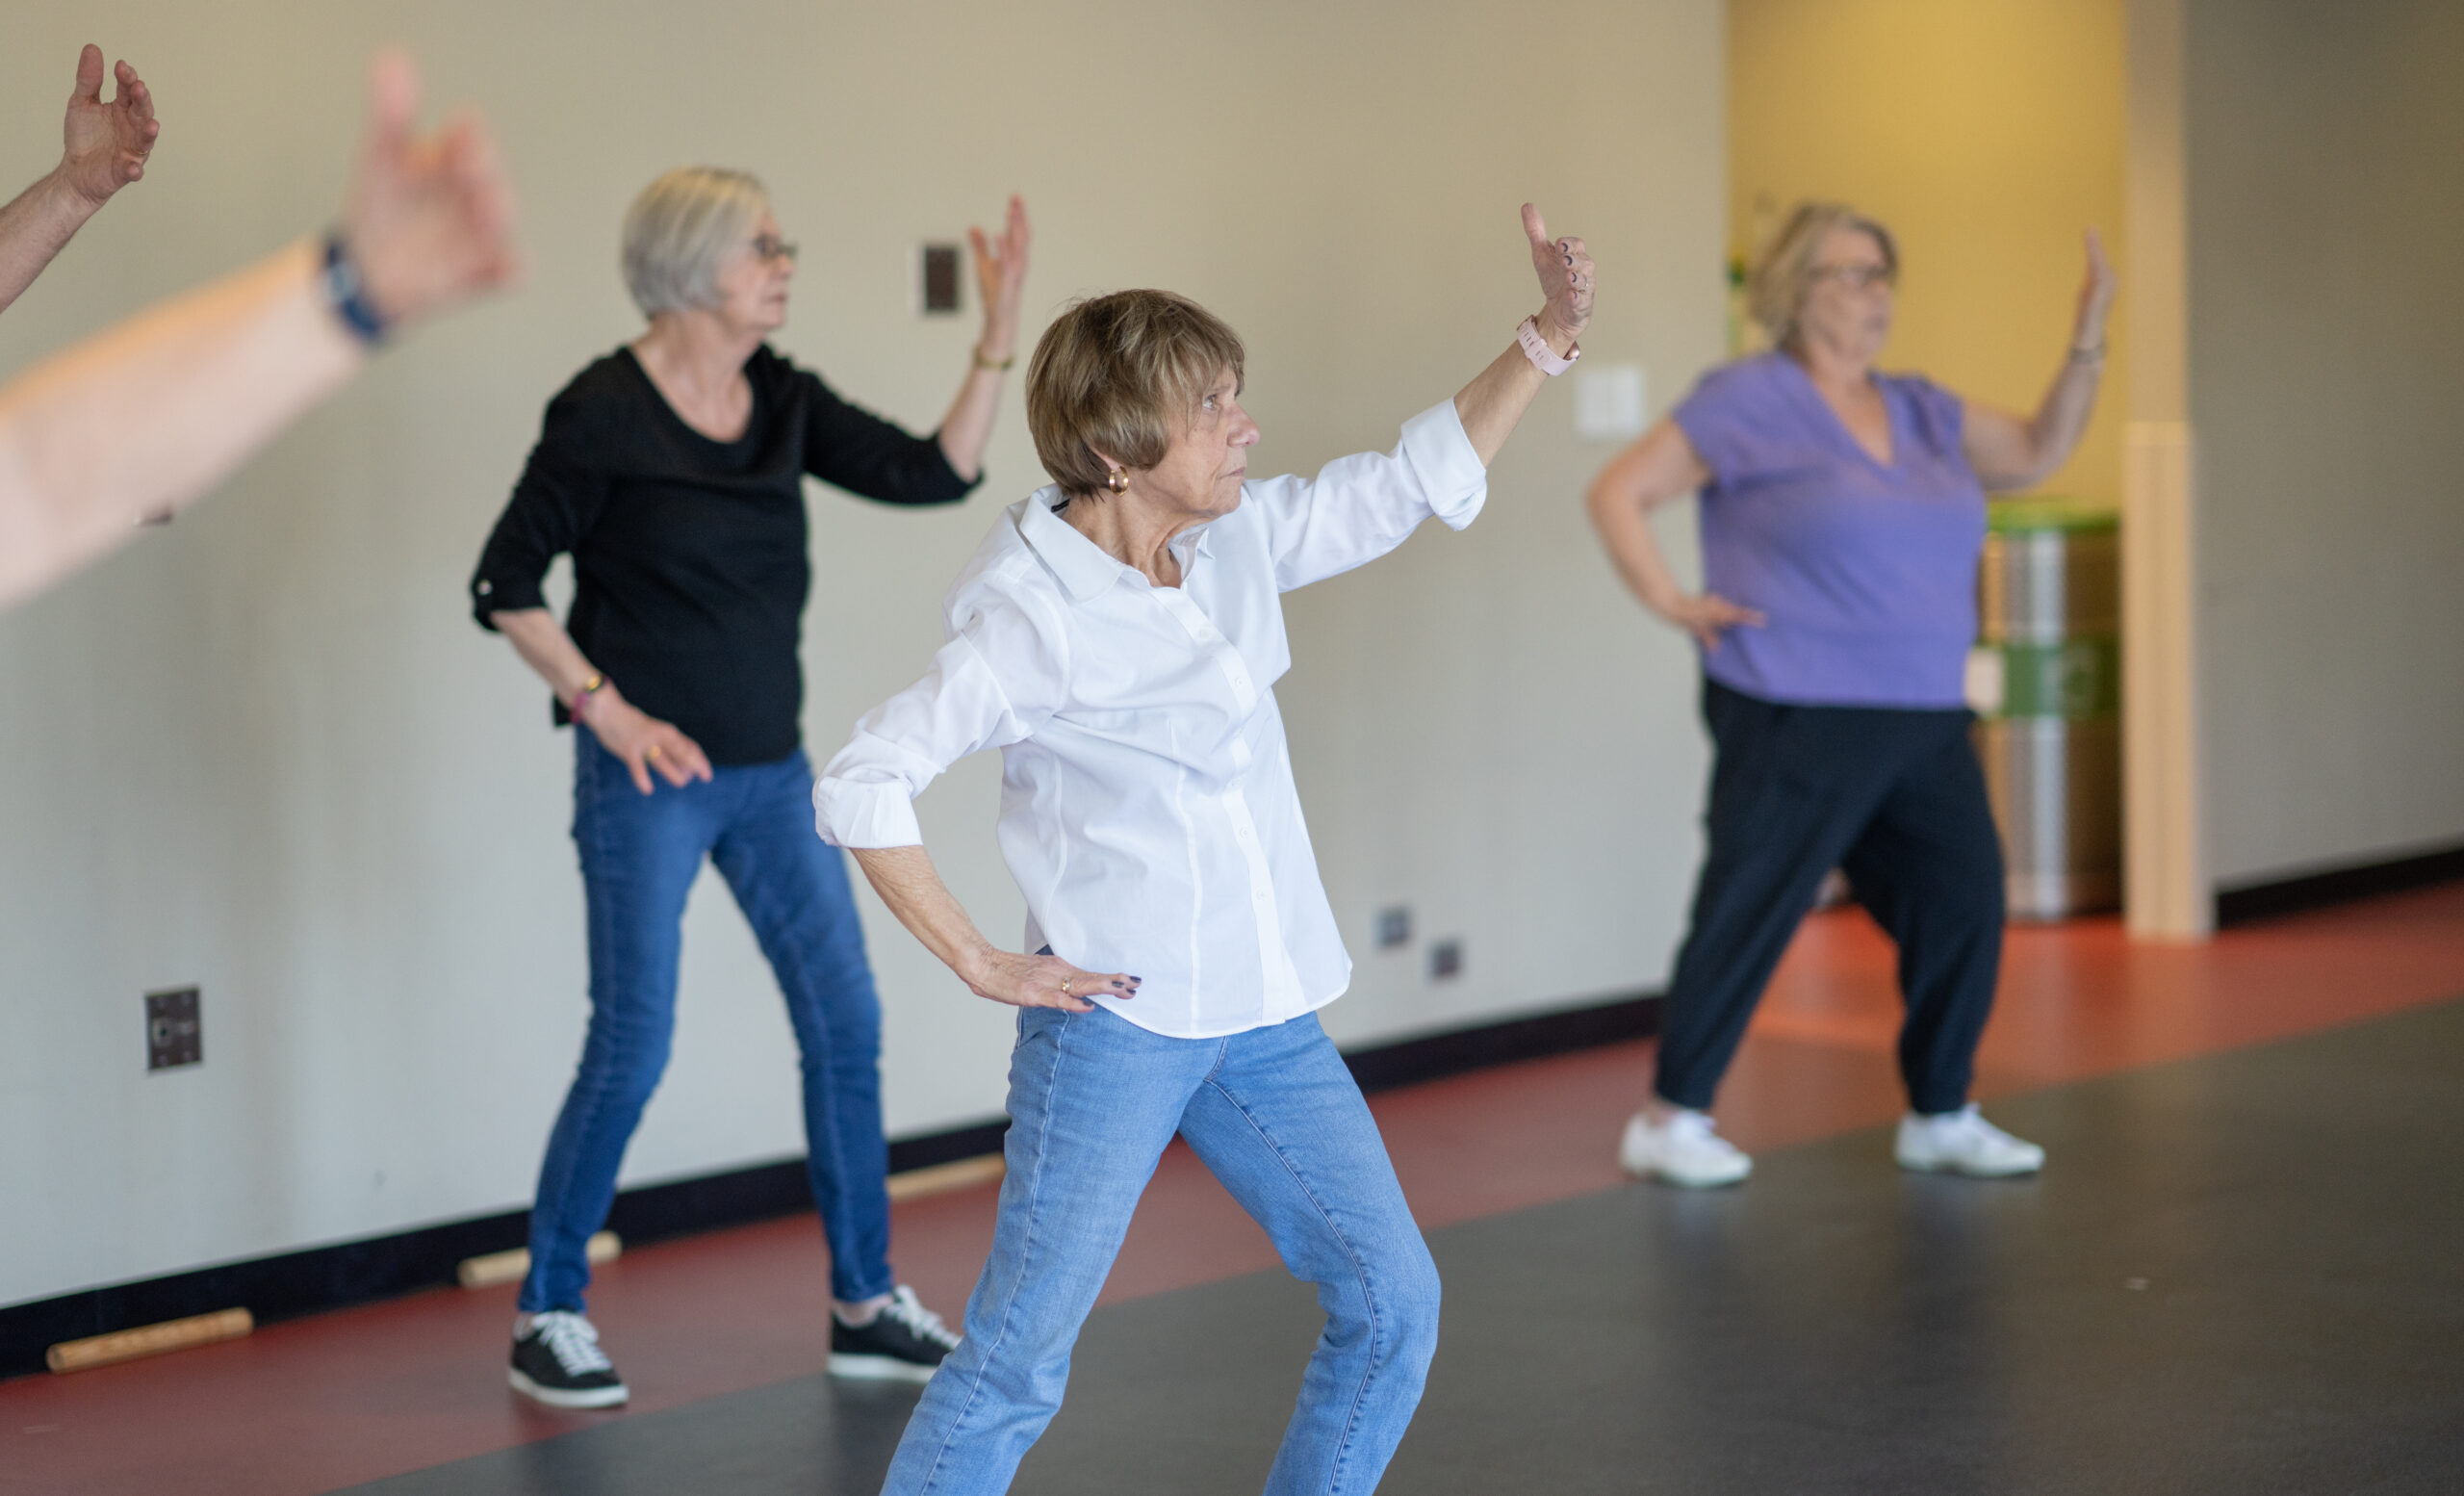 Participants move steadily through arm motions during a tai chi class at the MCC.